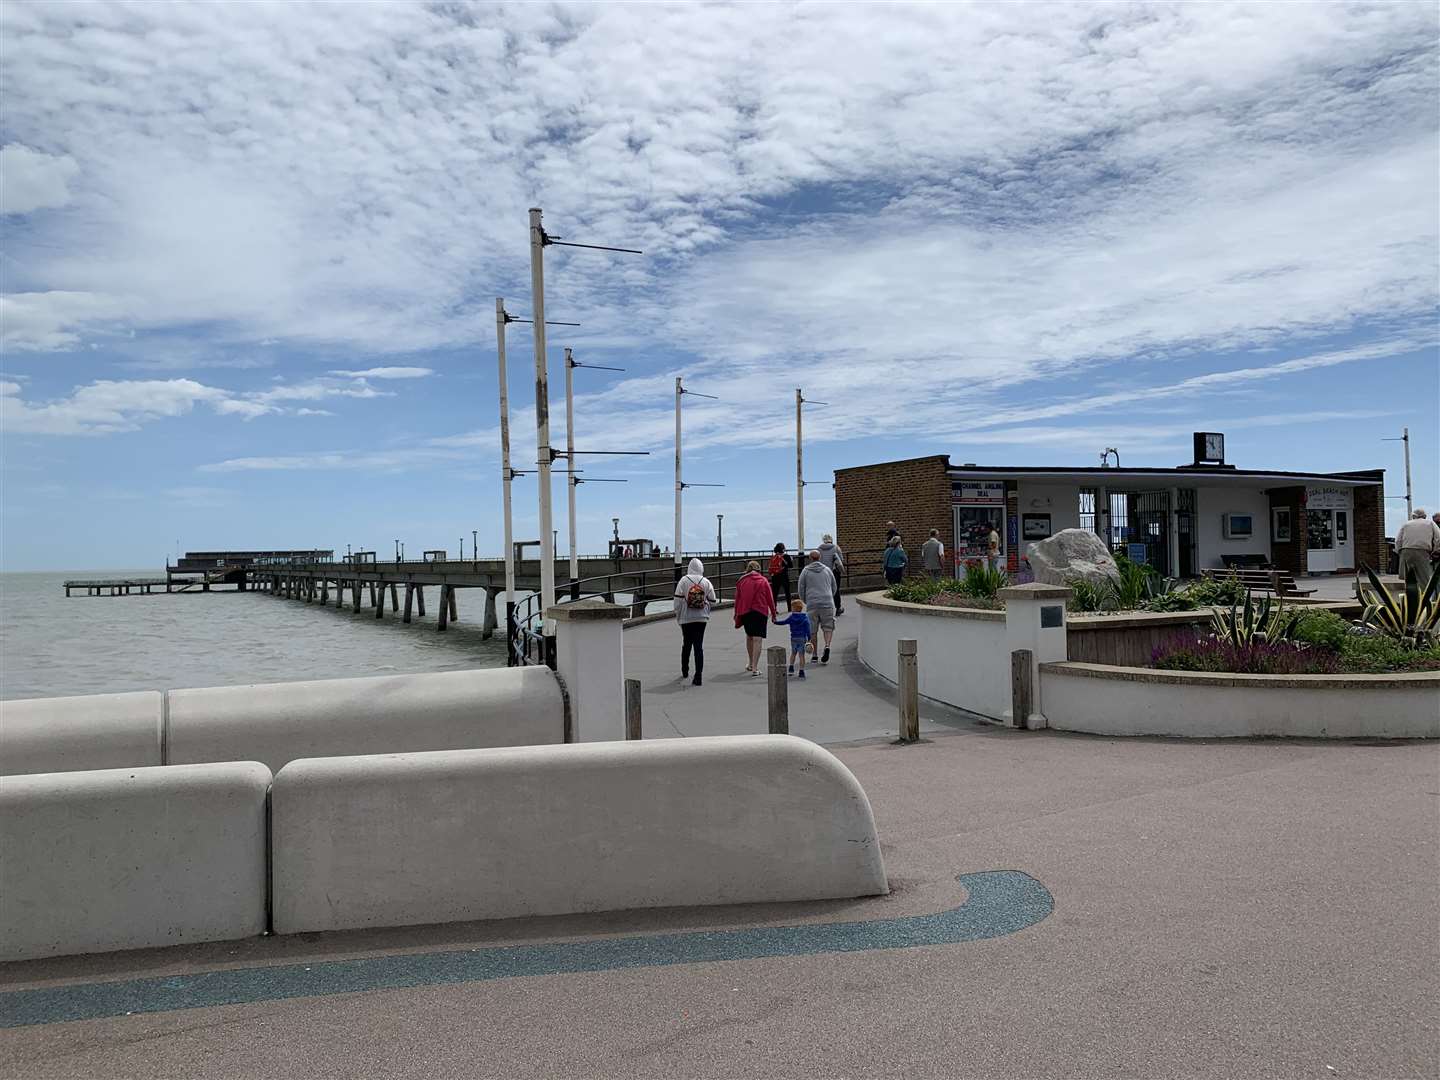 The new restaurant will be situated in a prime location opposite Deal Pier